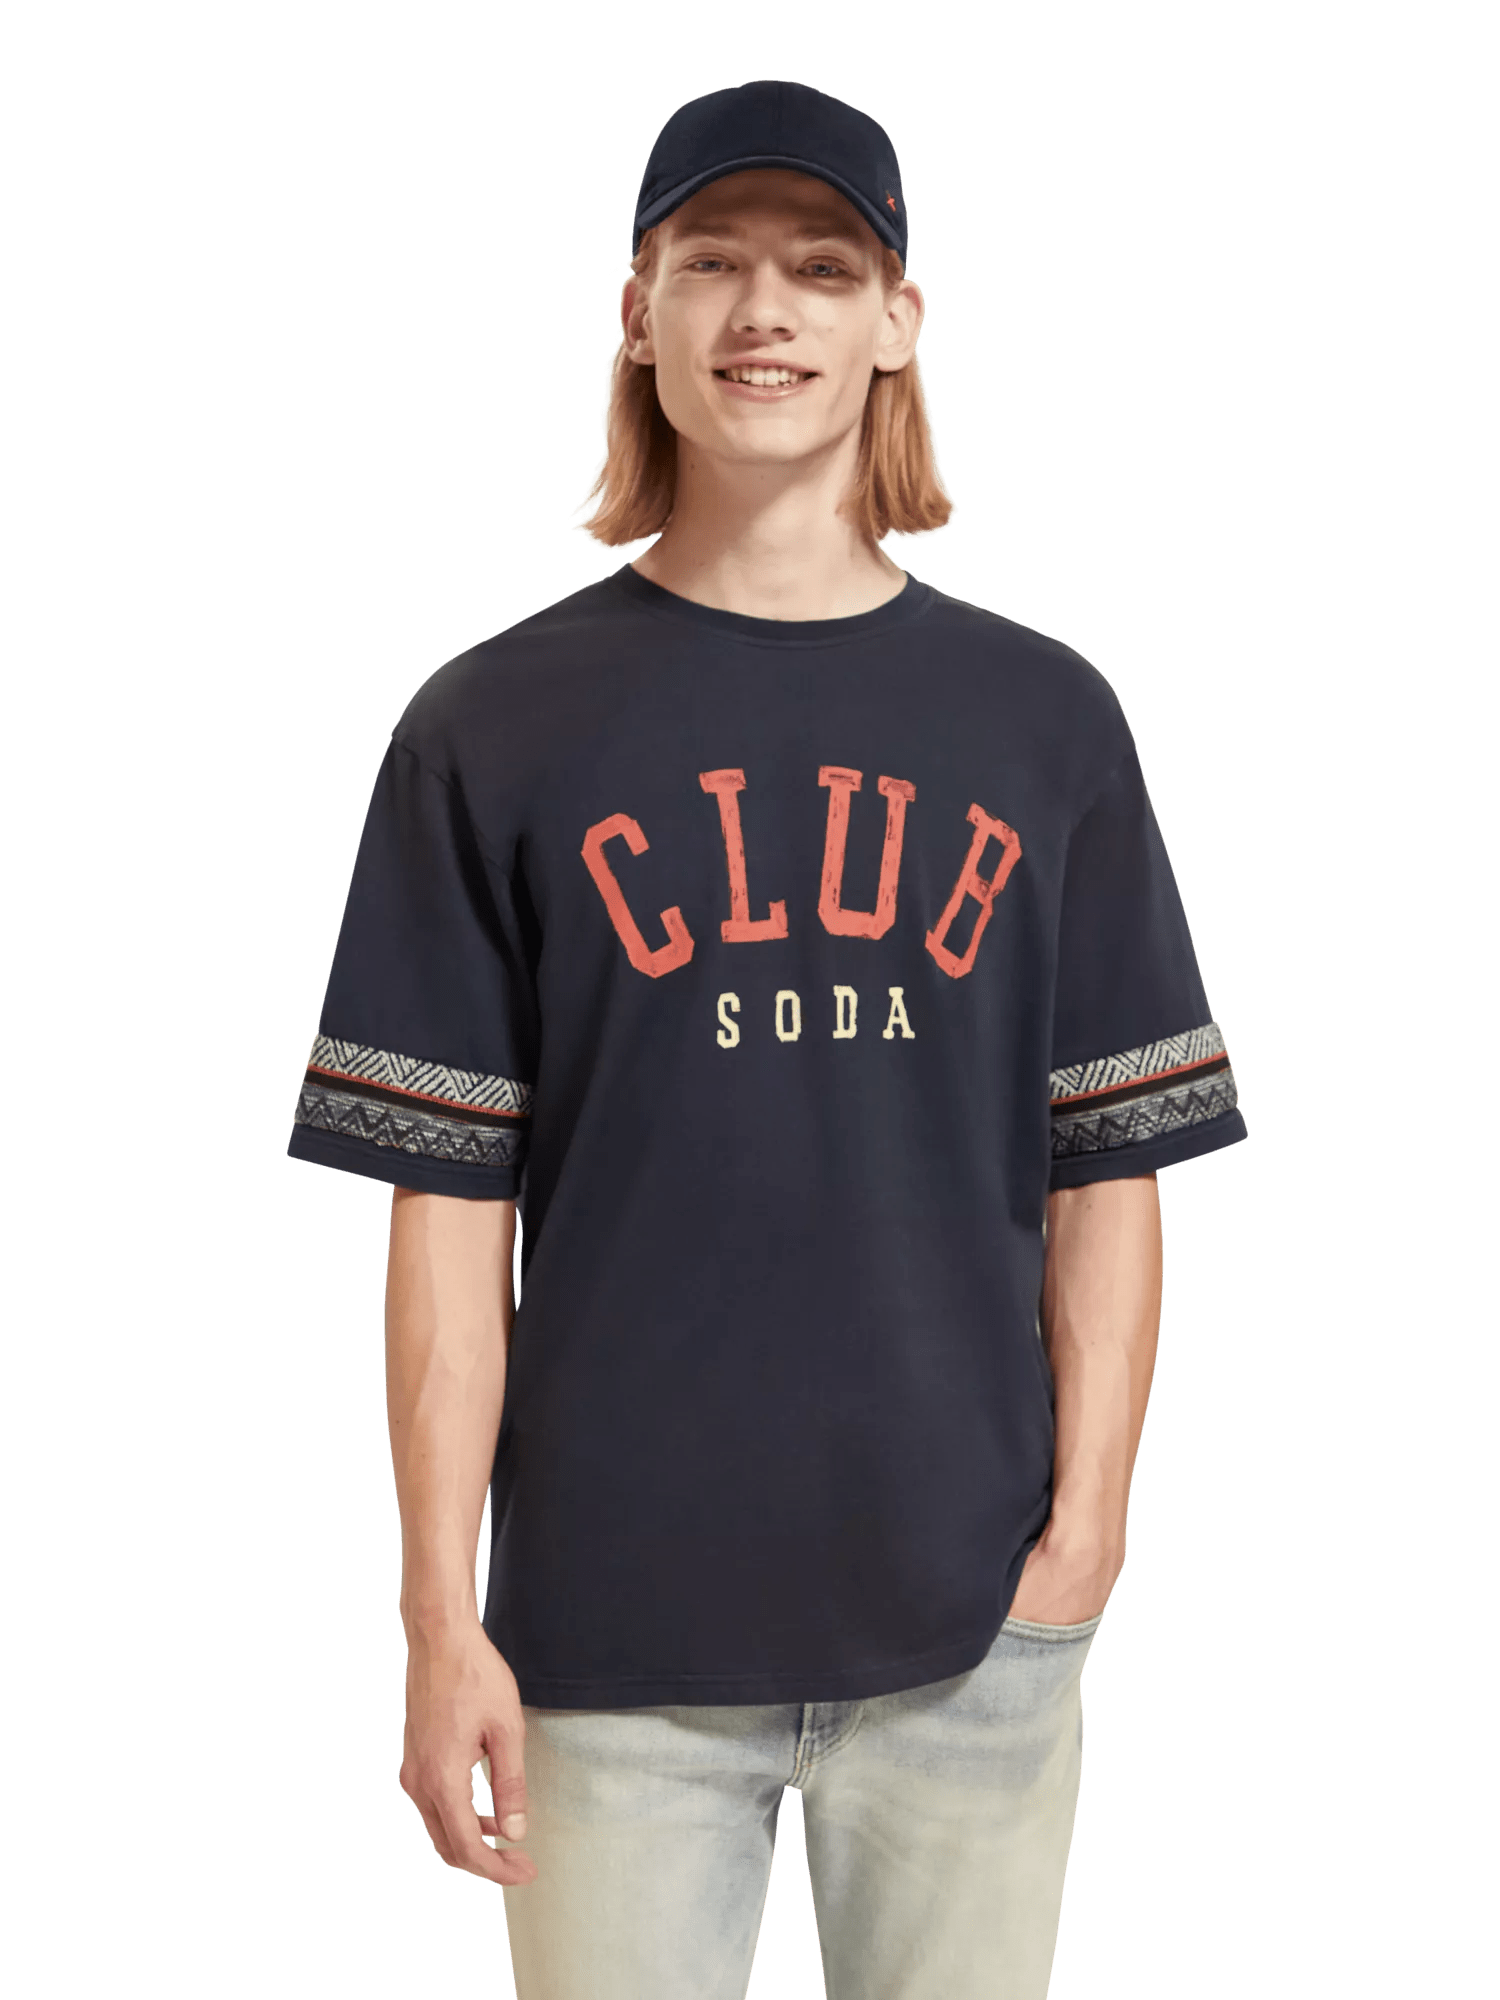 Scotch & Soda Relaxed fit club soda applique T-shirt in Organic Cotton 174587_0002_MDL_CRP